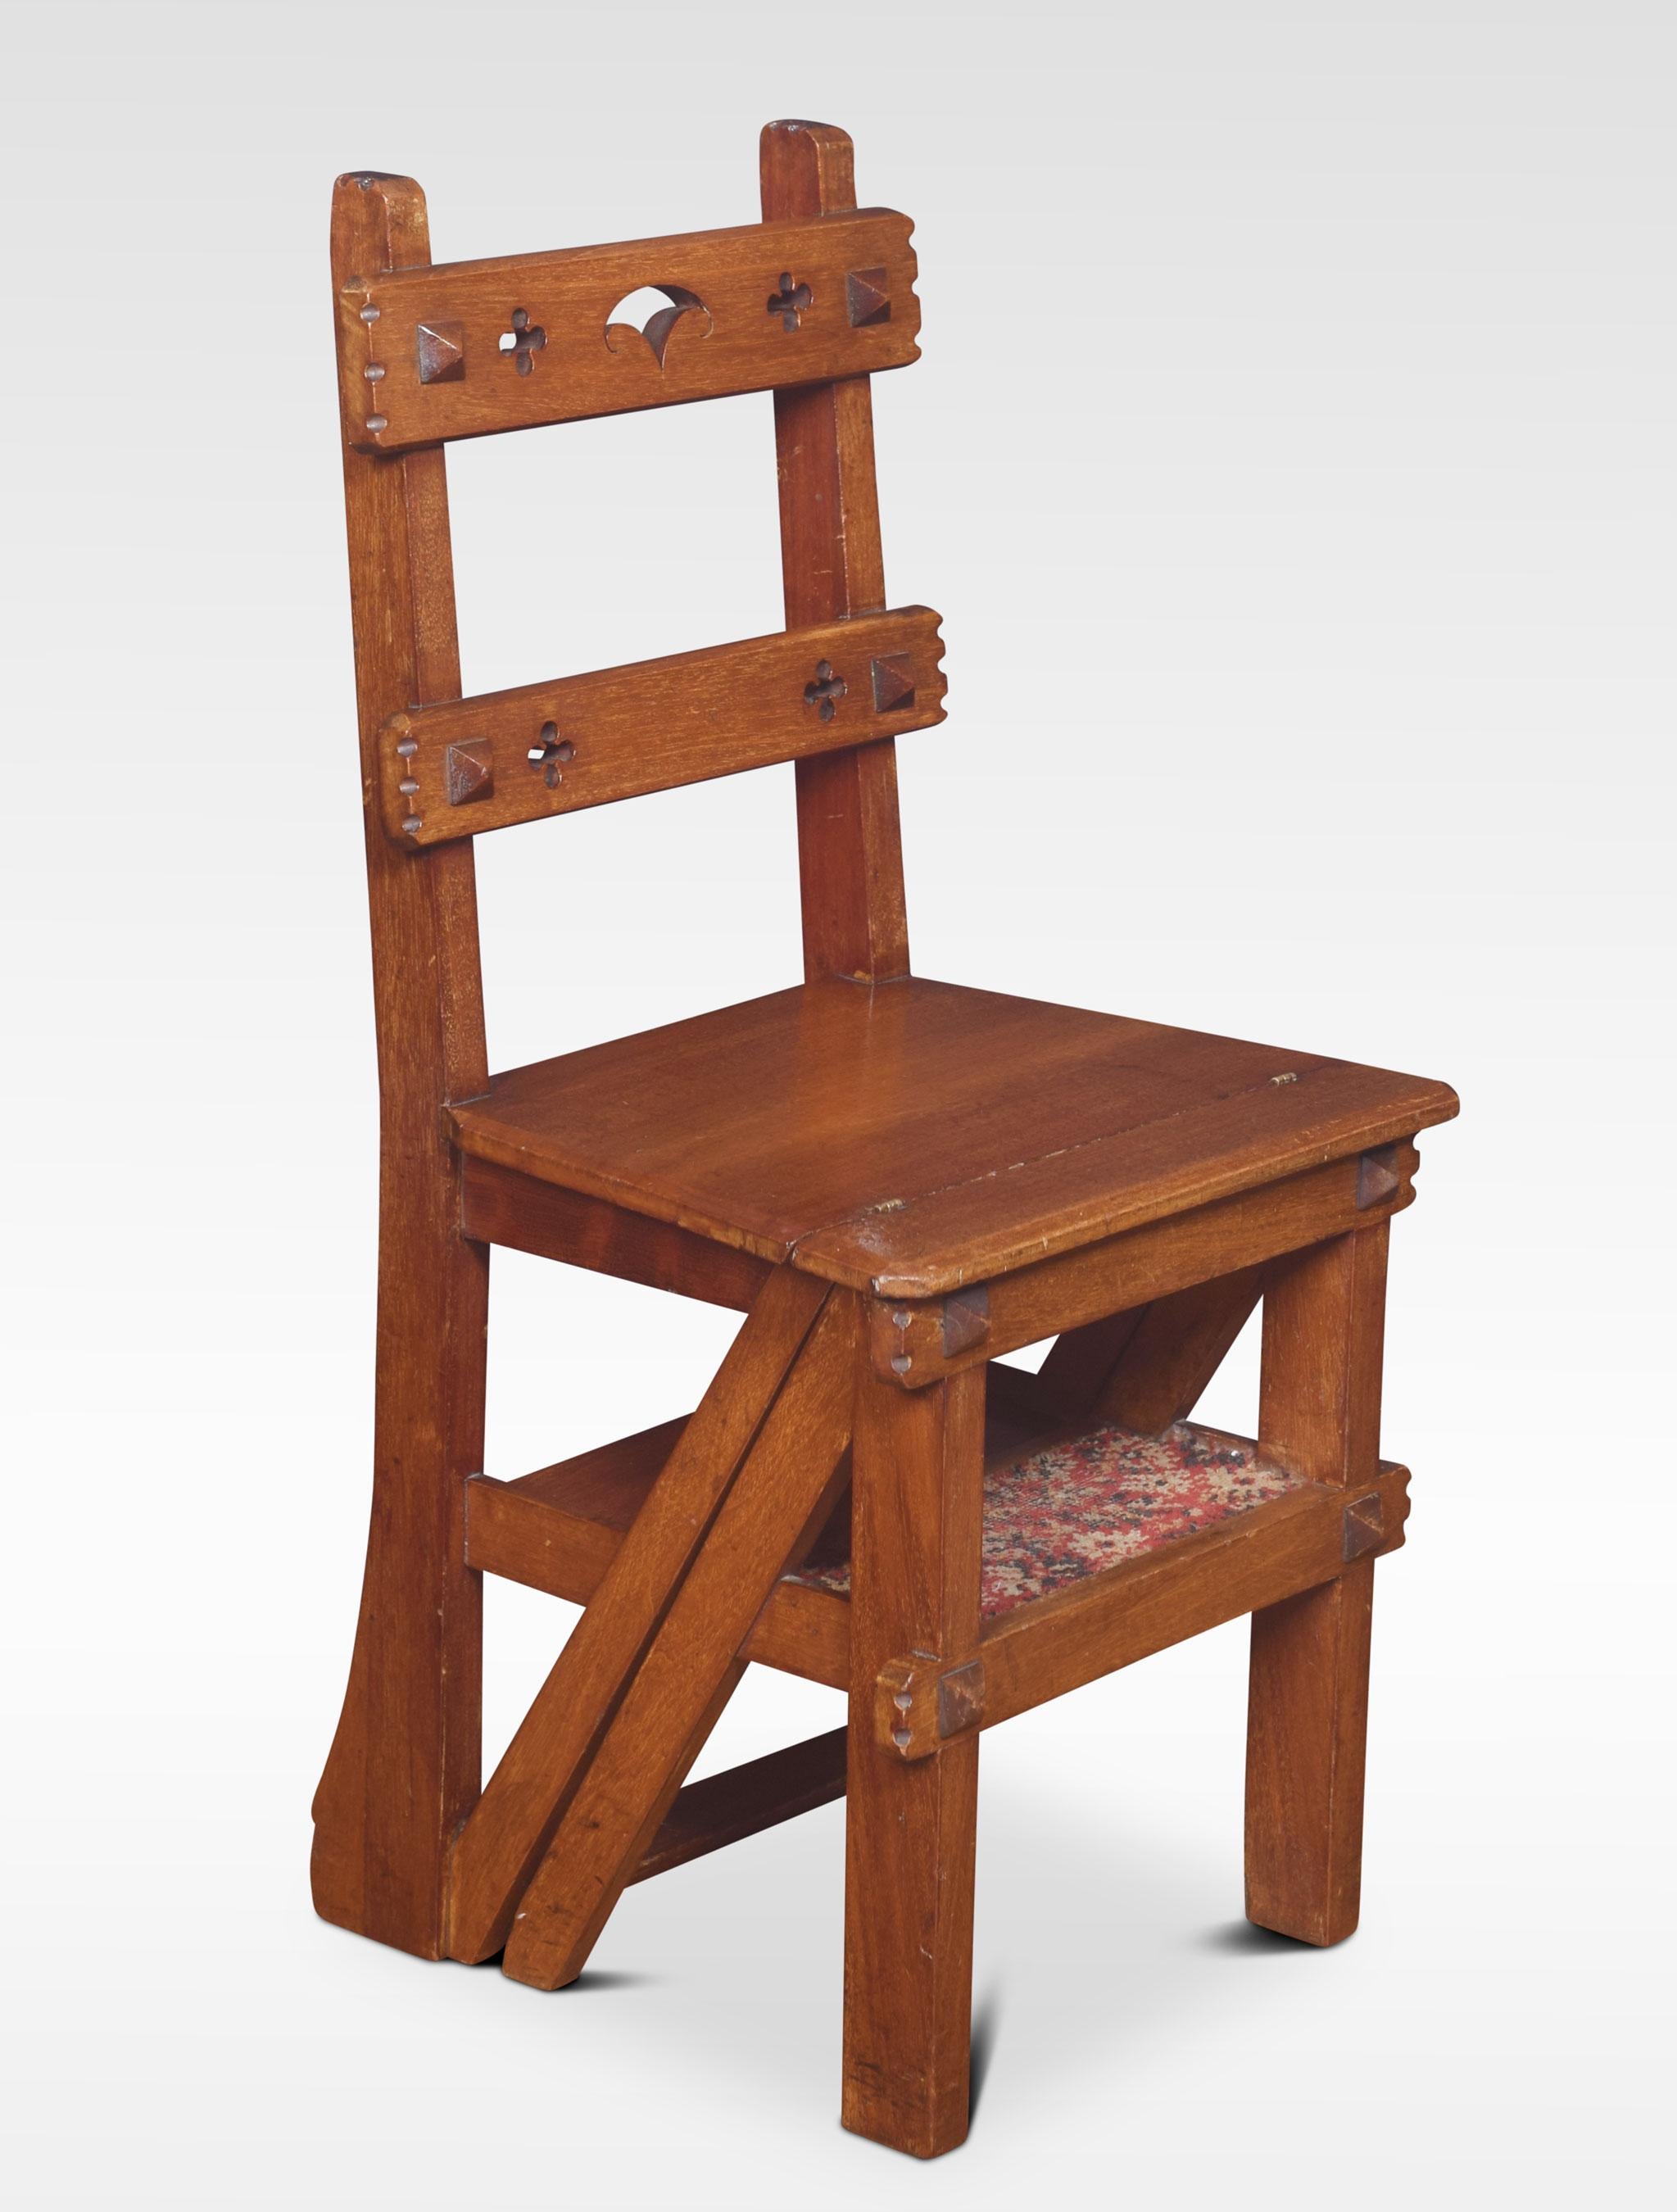 19th century walnut metamorphic chair, with pierced back above solid seat the chair opens into a sturdy set of library steps.

Dimensions:
Height 35 inches height to seat 17.5 inches
Width 18 inches
Depth 17 inches.